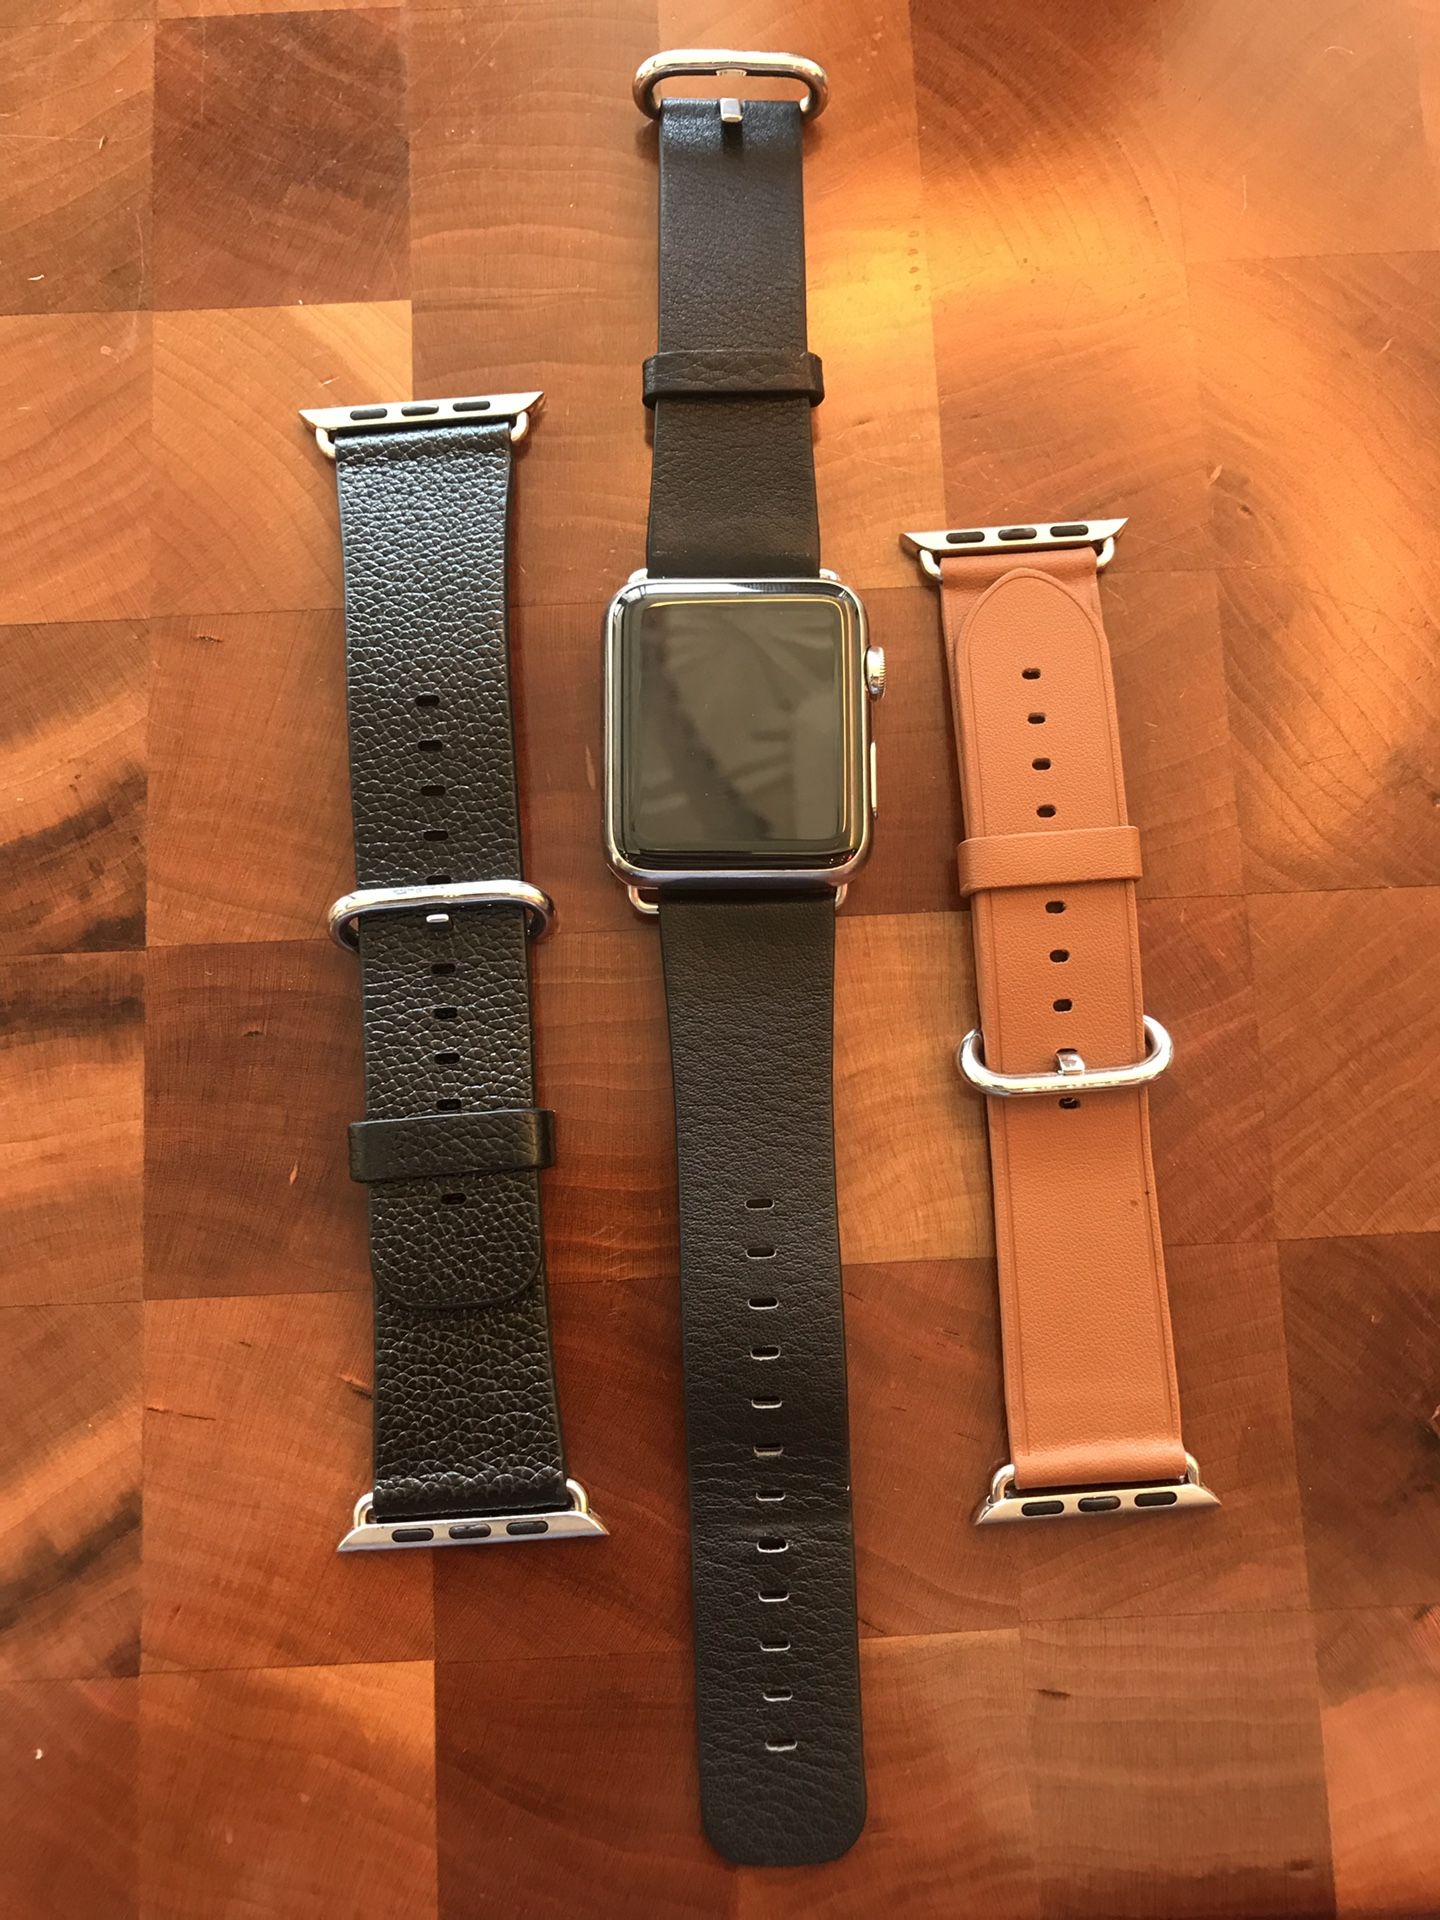 Stainless Steel Series 0 42mm Apple Watch with 3 bands.